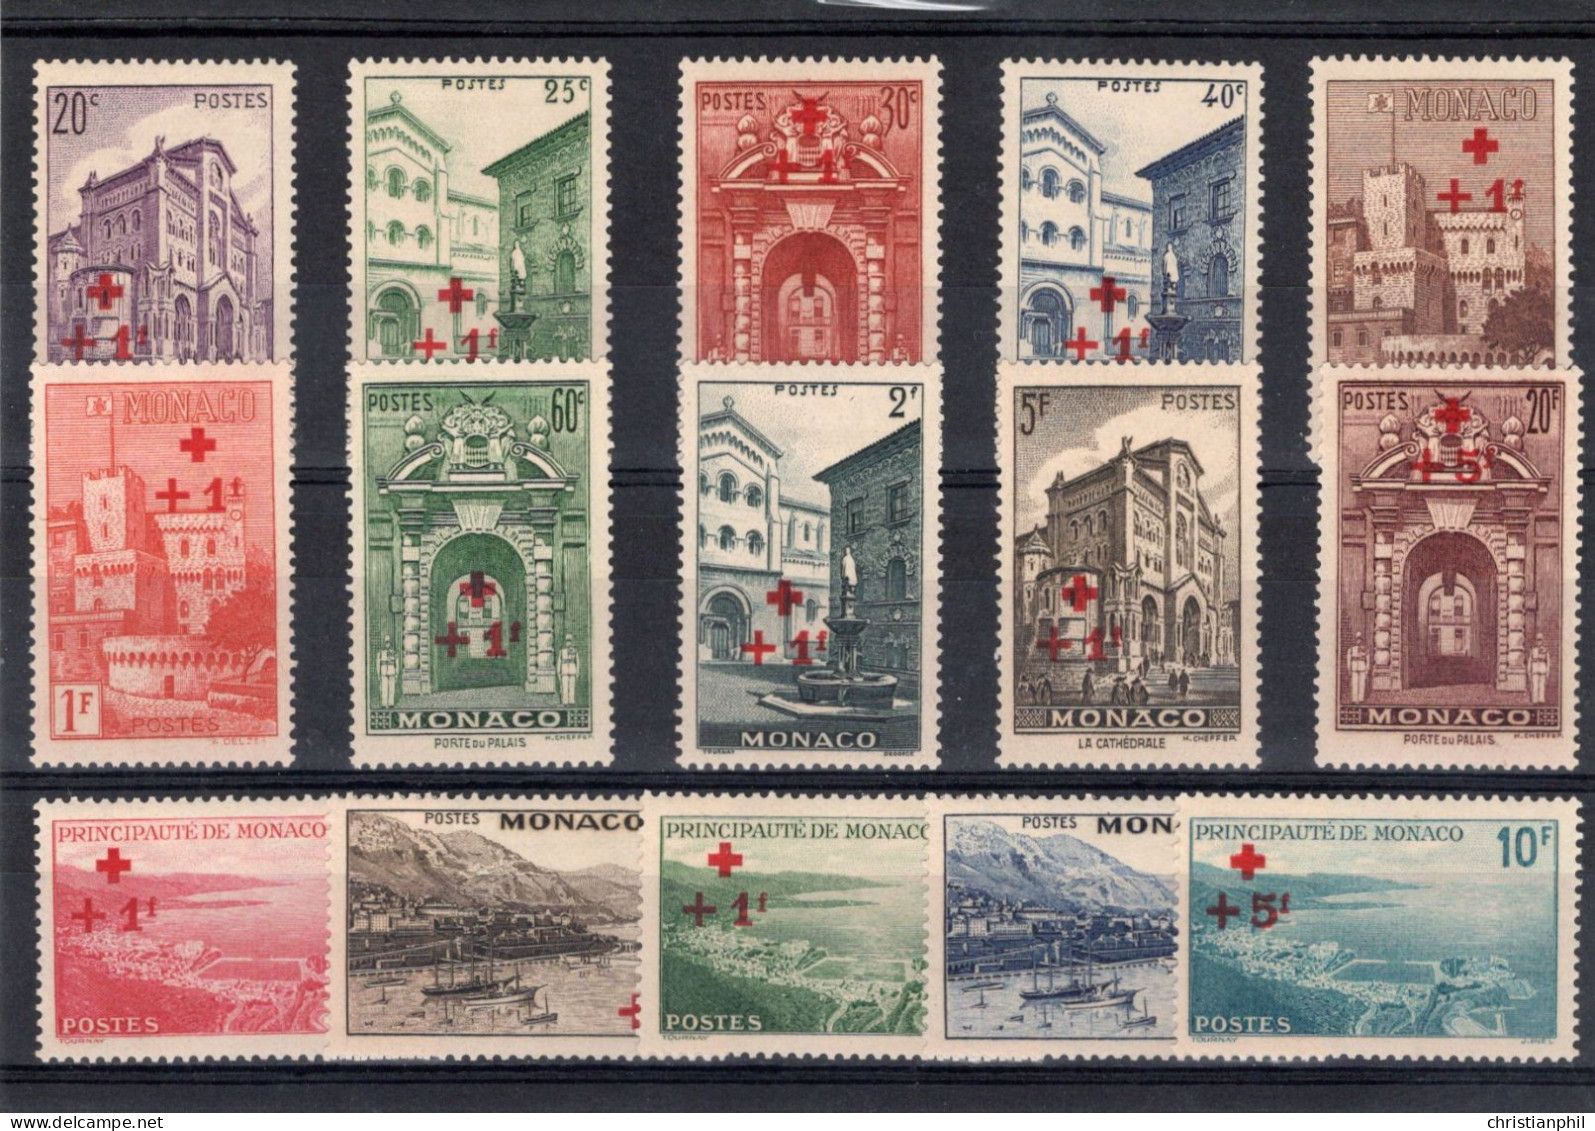 TIMBRES MONACO CROIX-ROUGE  . ANNEE 1940   N° 200 à 214. NEUF * - Nuovi